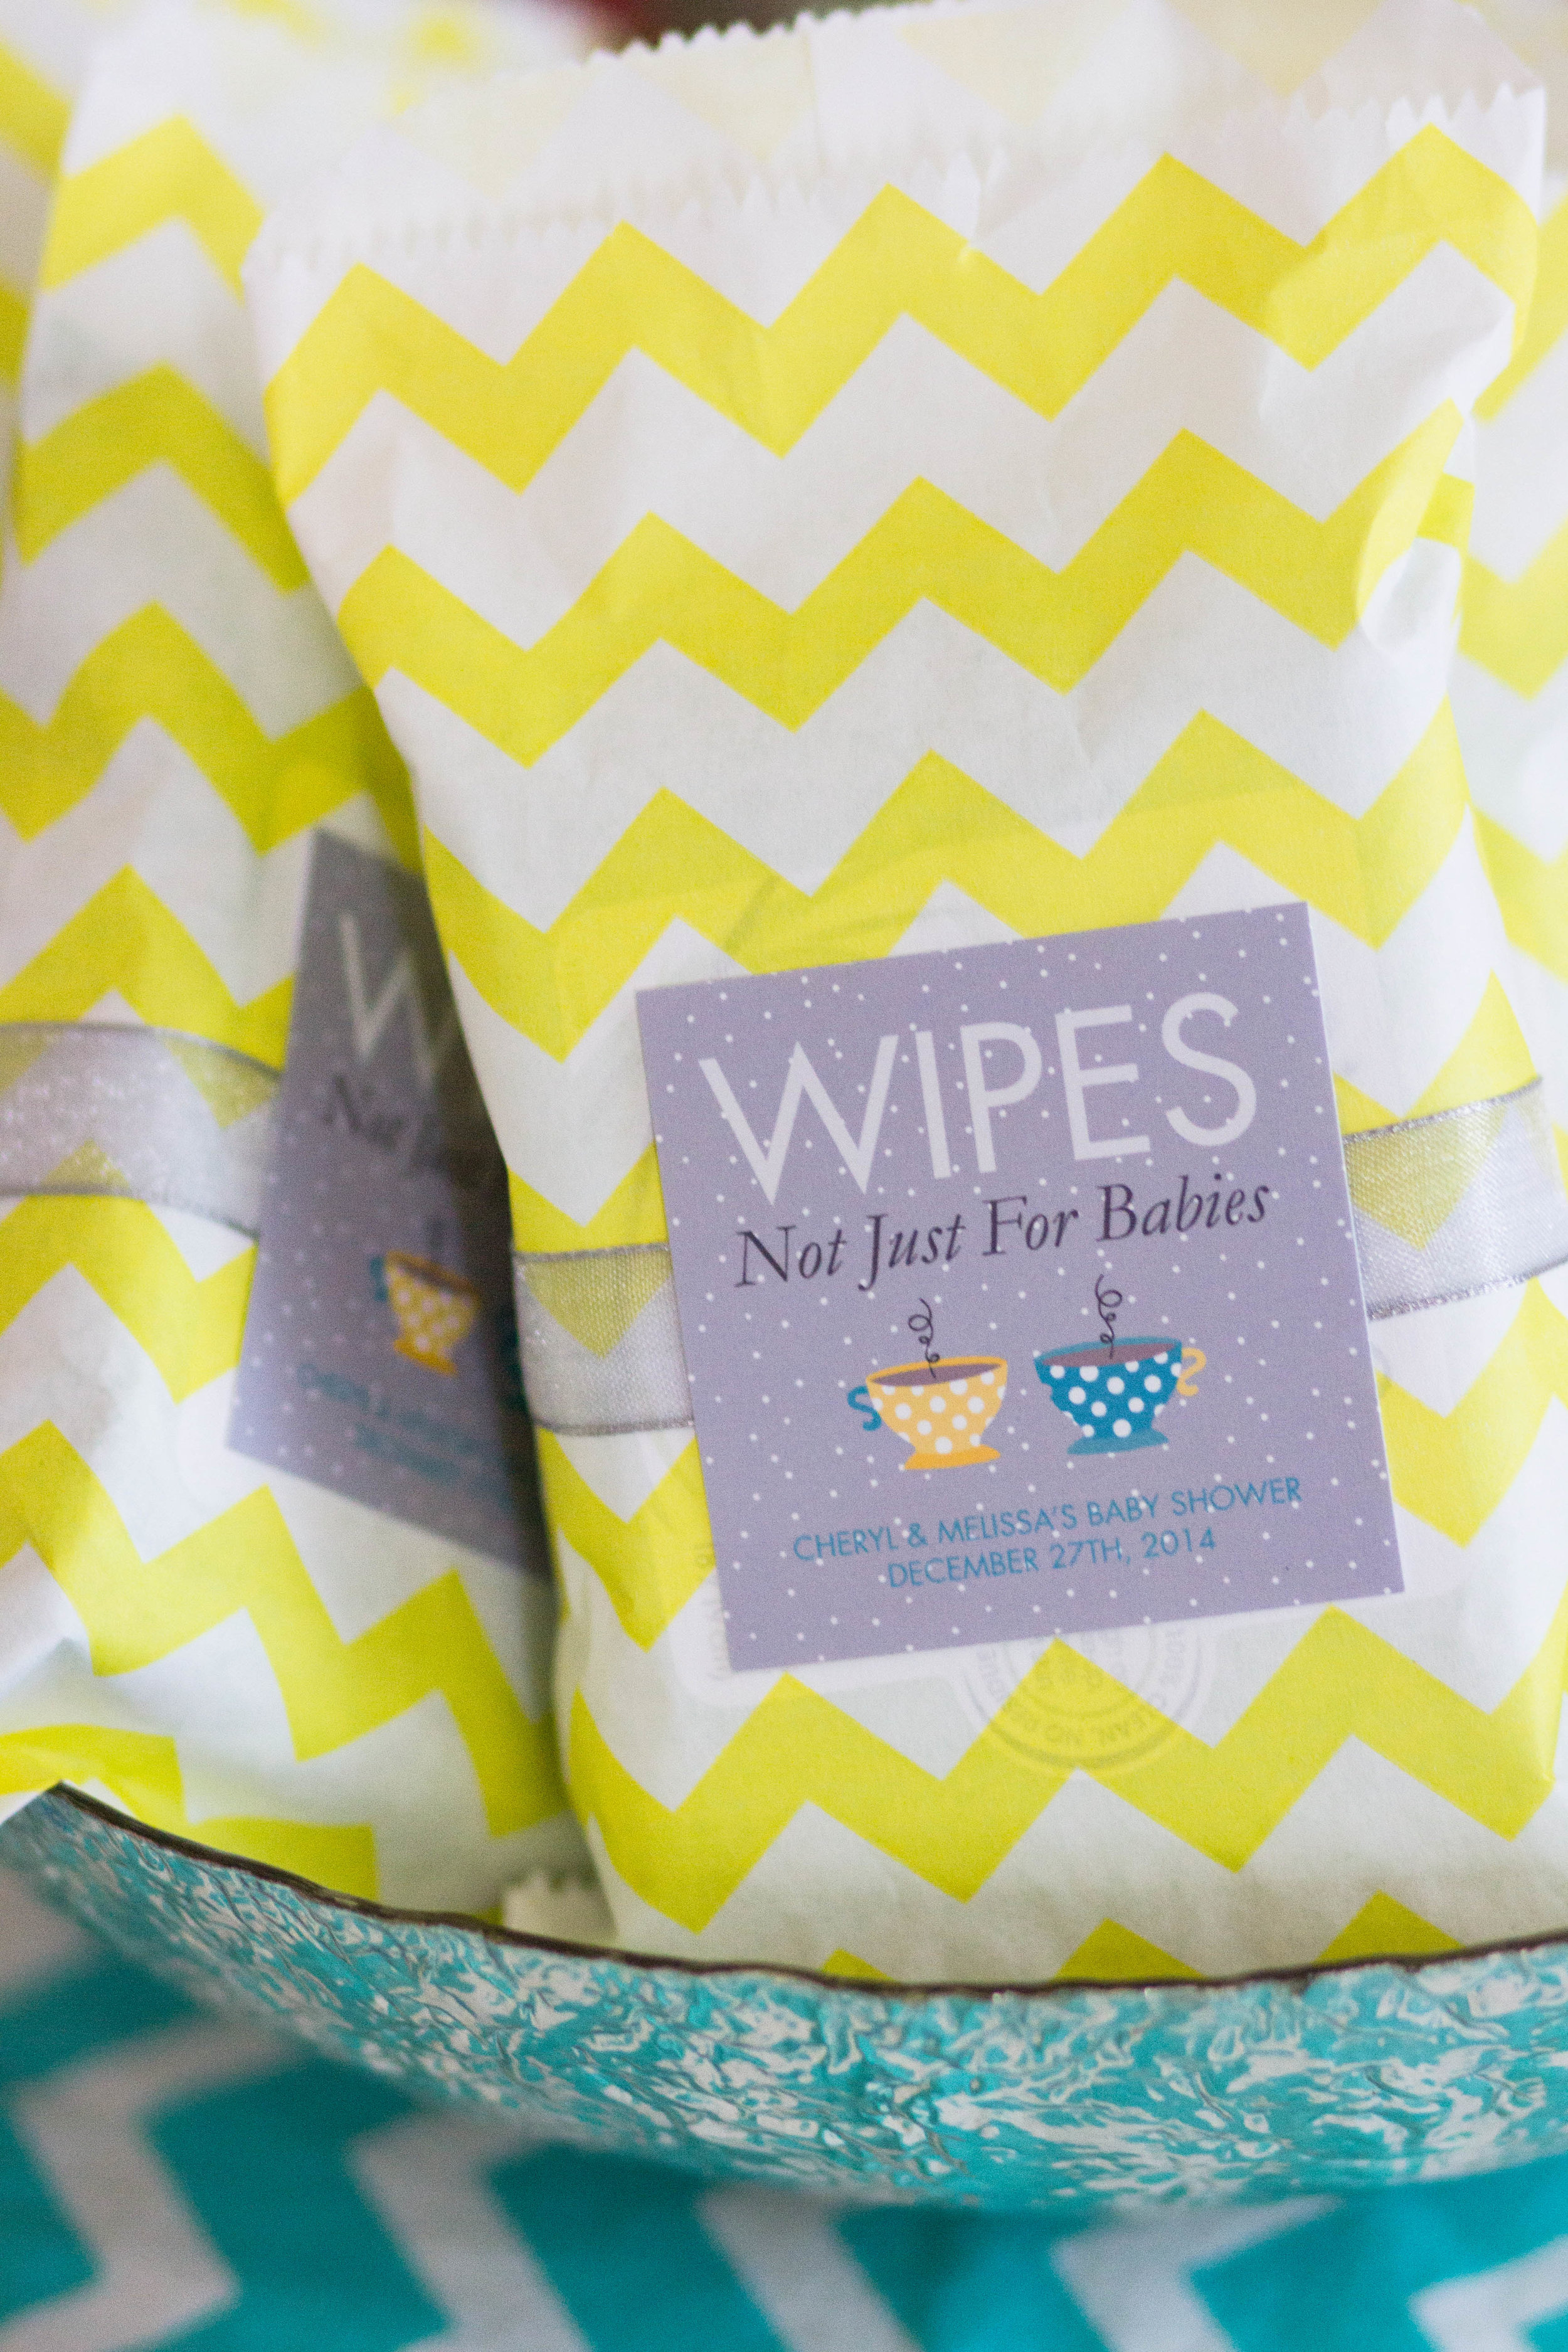 Wipes, not just for babies tags for a winter baby shower. // designs from shopmkkm.com